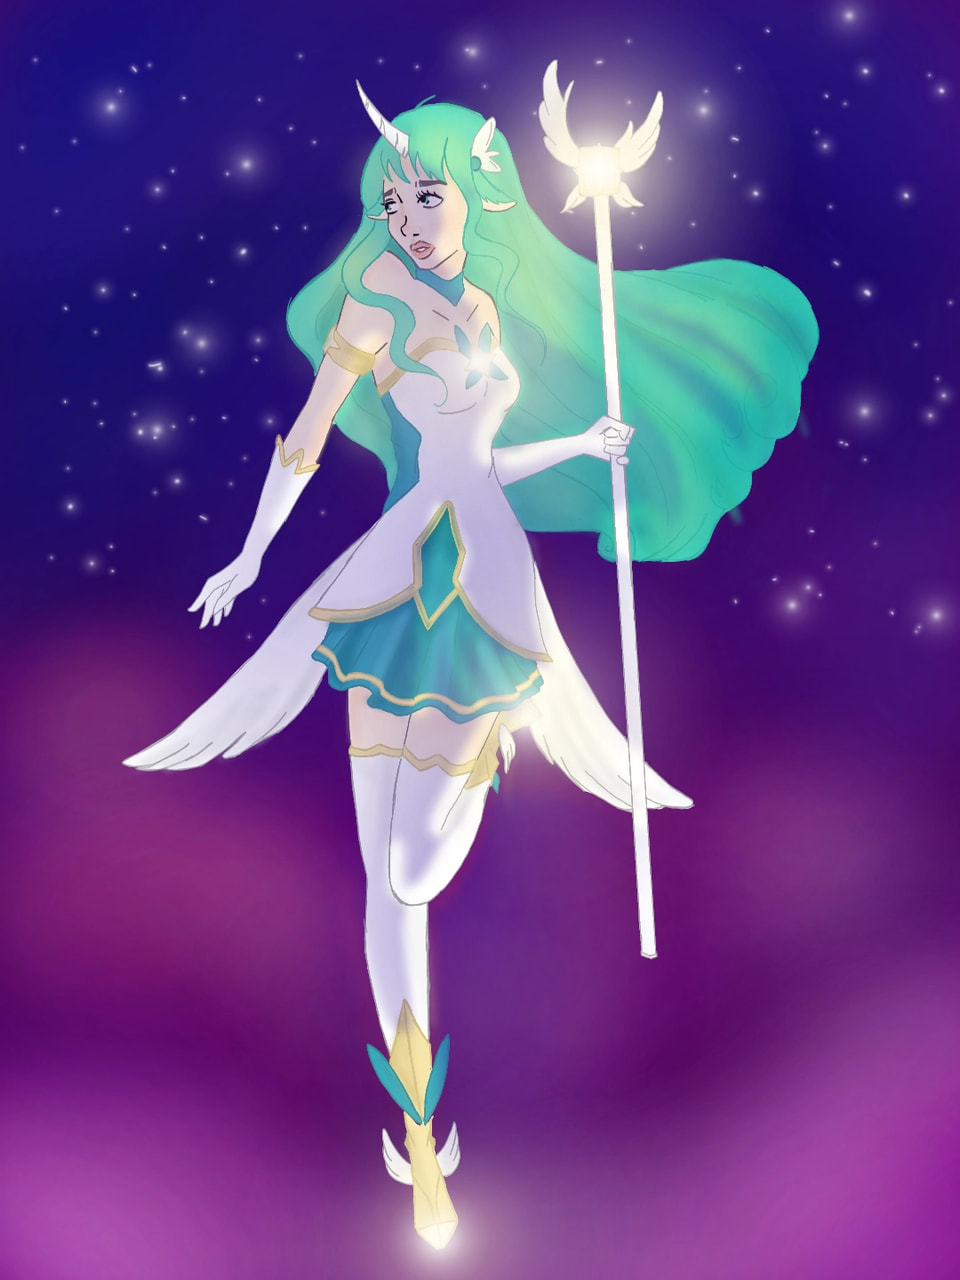 Edit: someone stole this art already. Link in comments. Star Guardian Soraka from League of Legends! #100PercentSketch #fridayswithsketch #gamechallenge  ‪@sonysketch‬